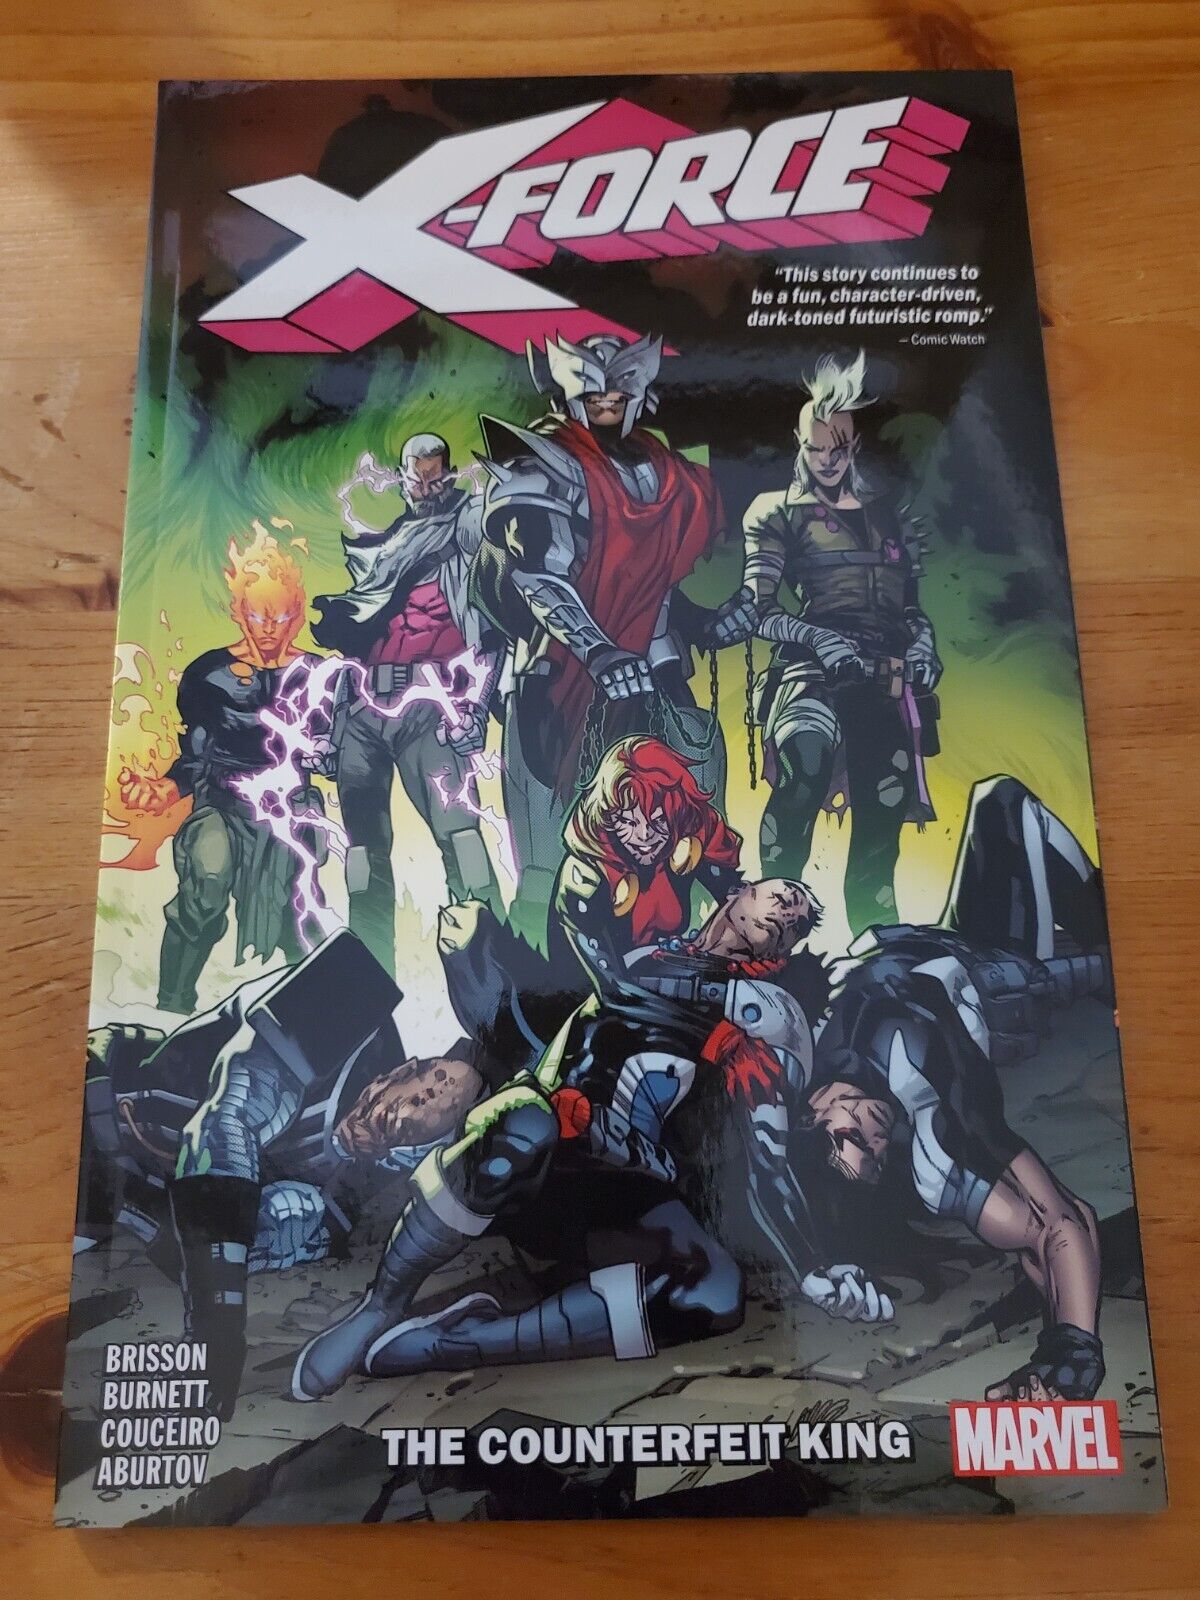 Marvel Comics X-Force Vol 2: The Counterfeit King (Trade Paperback, 2019)